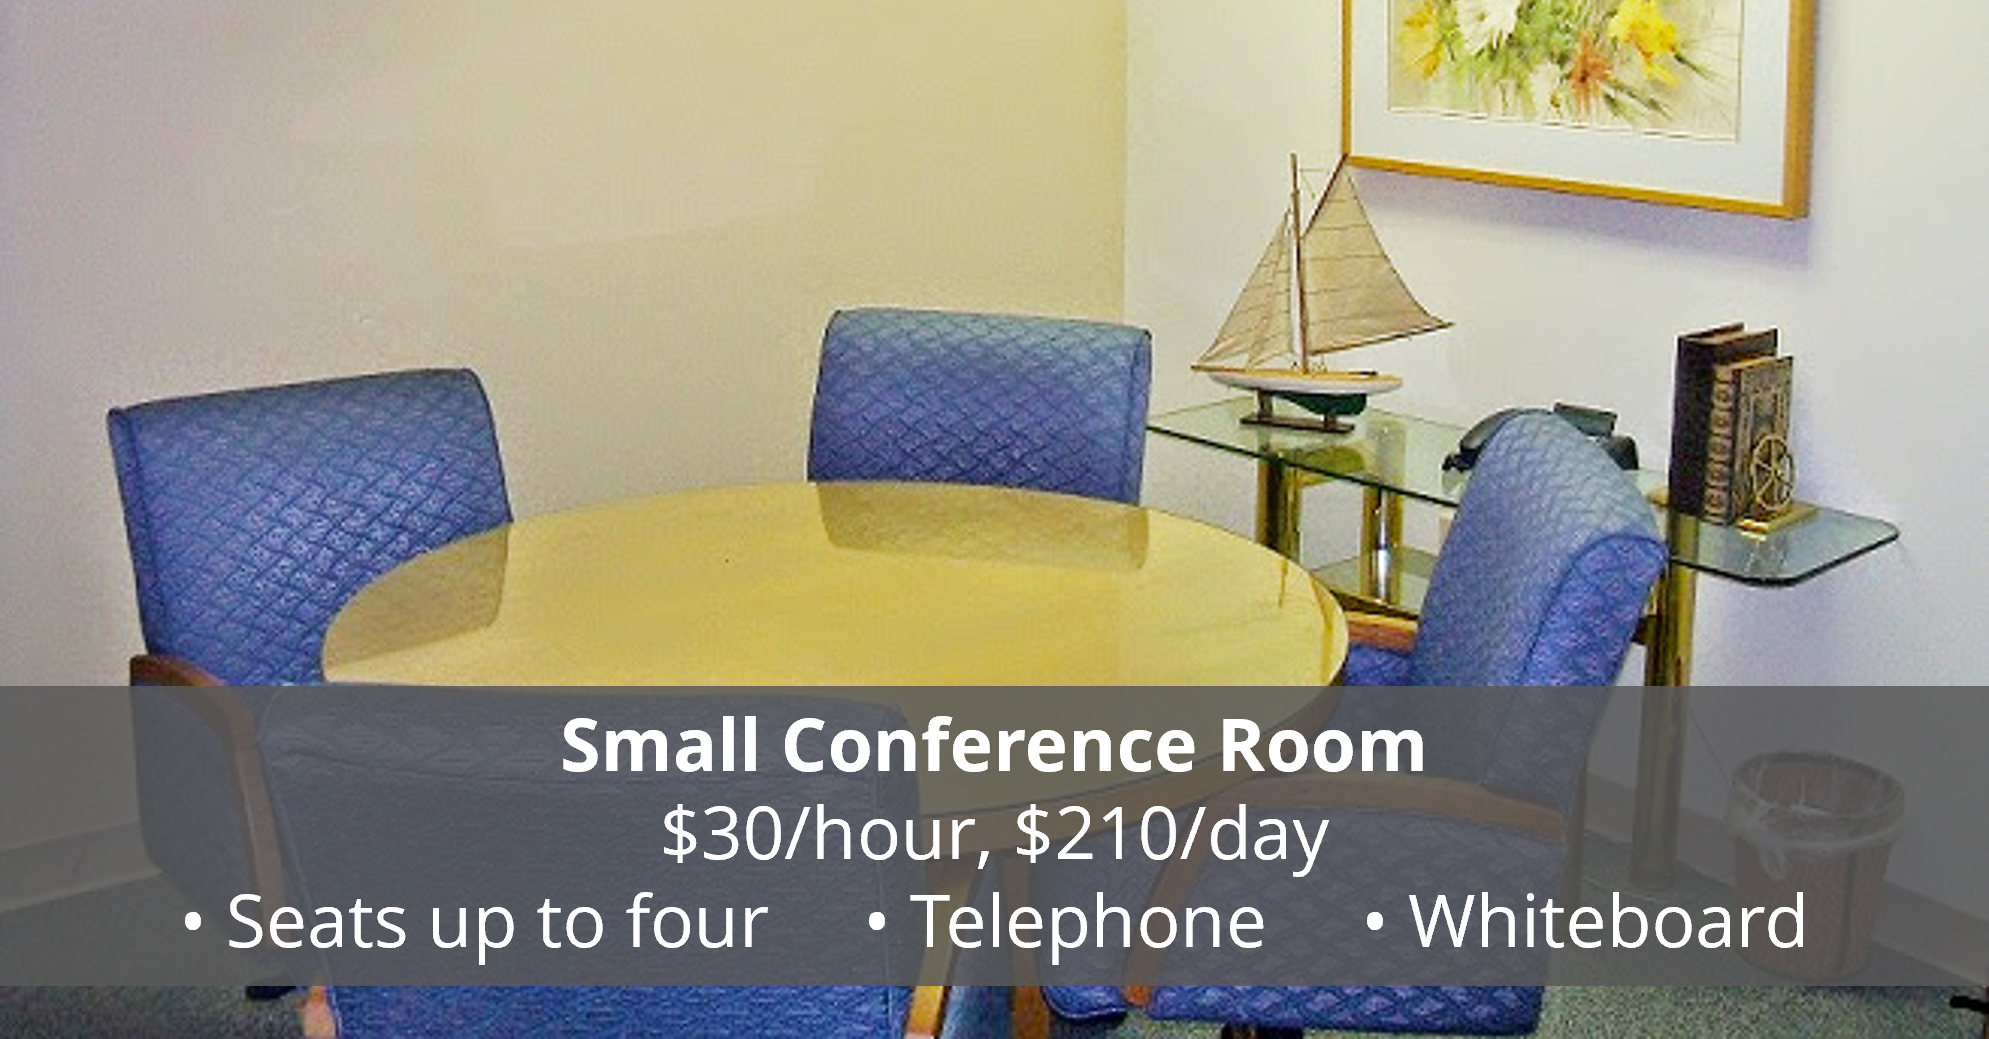 small conference room with list of features